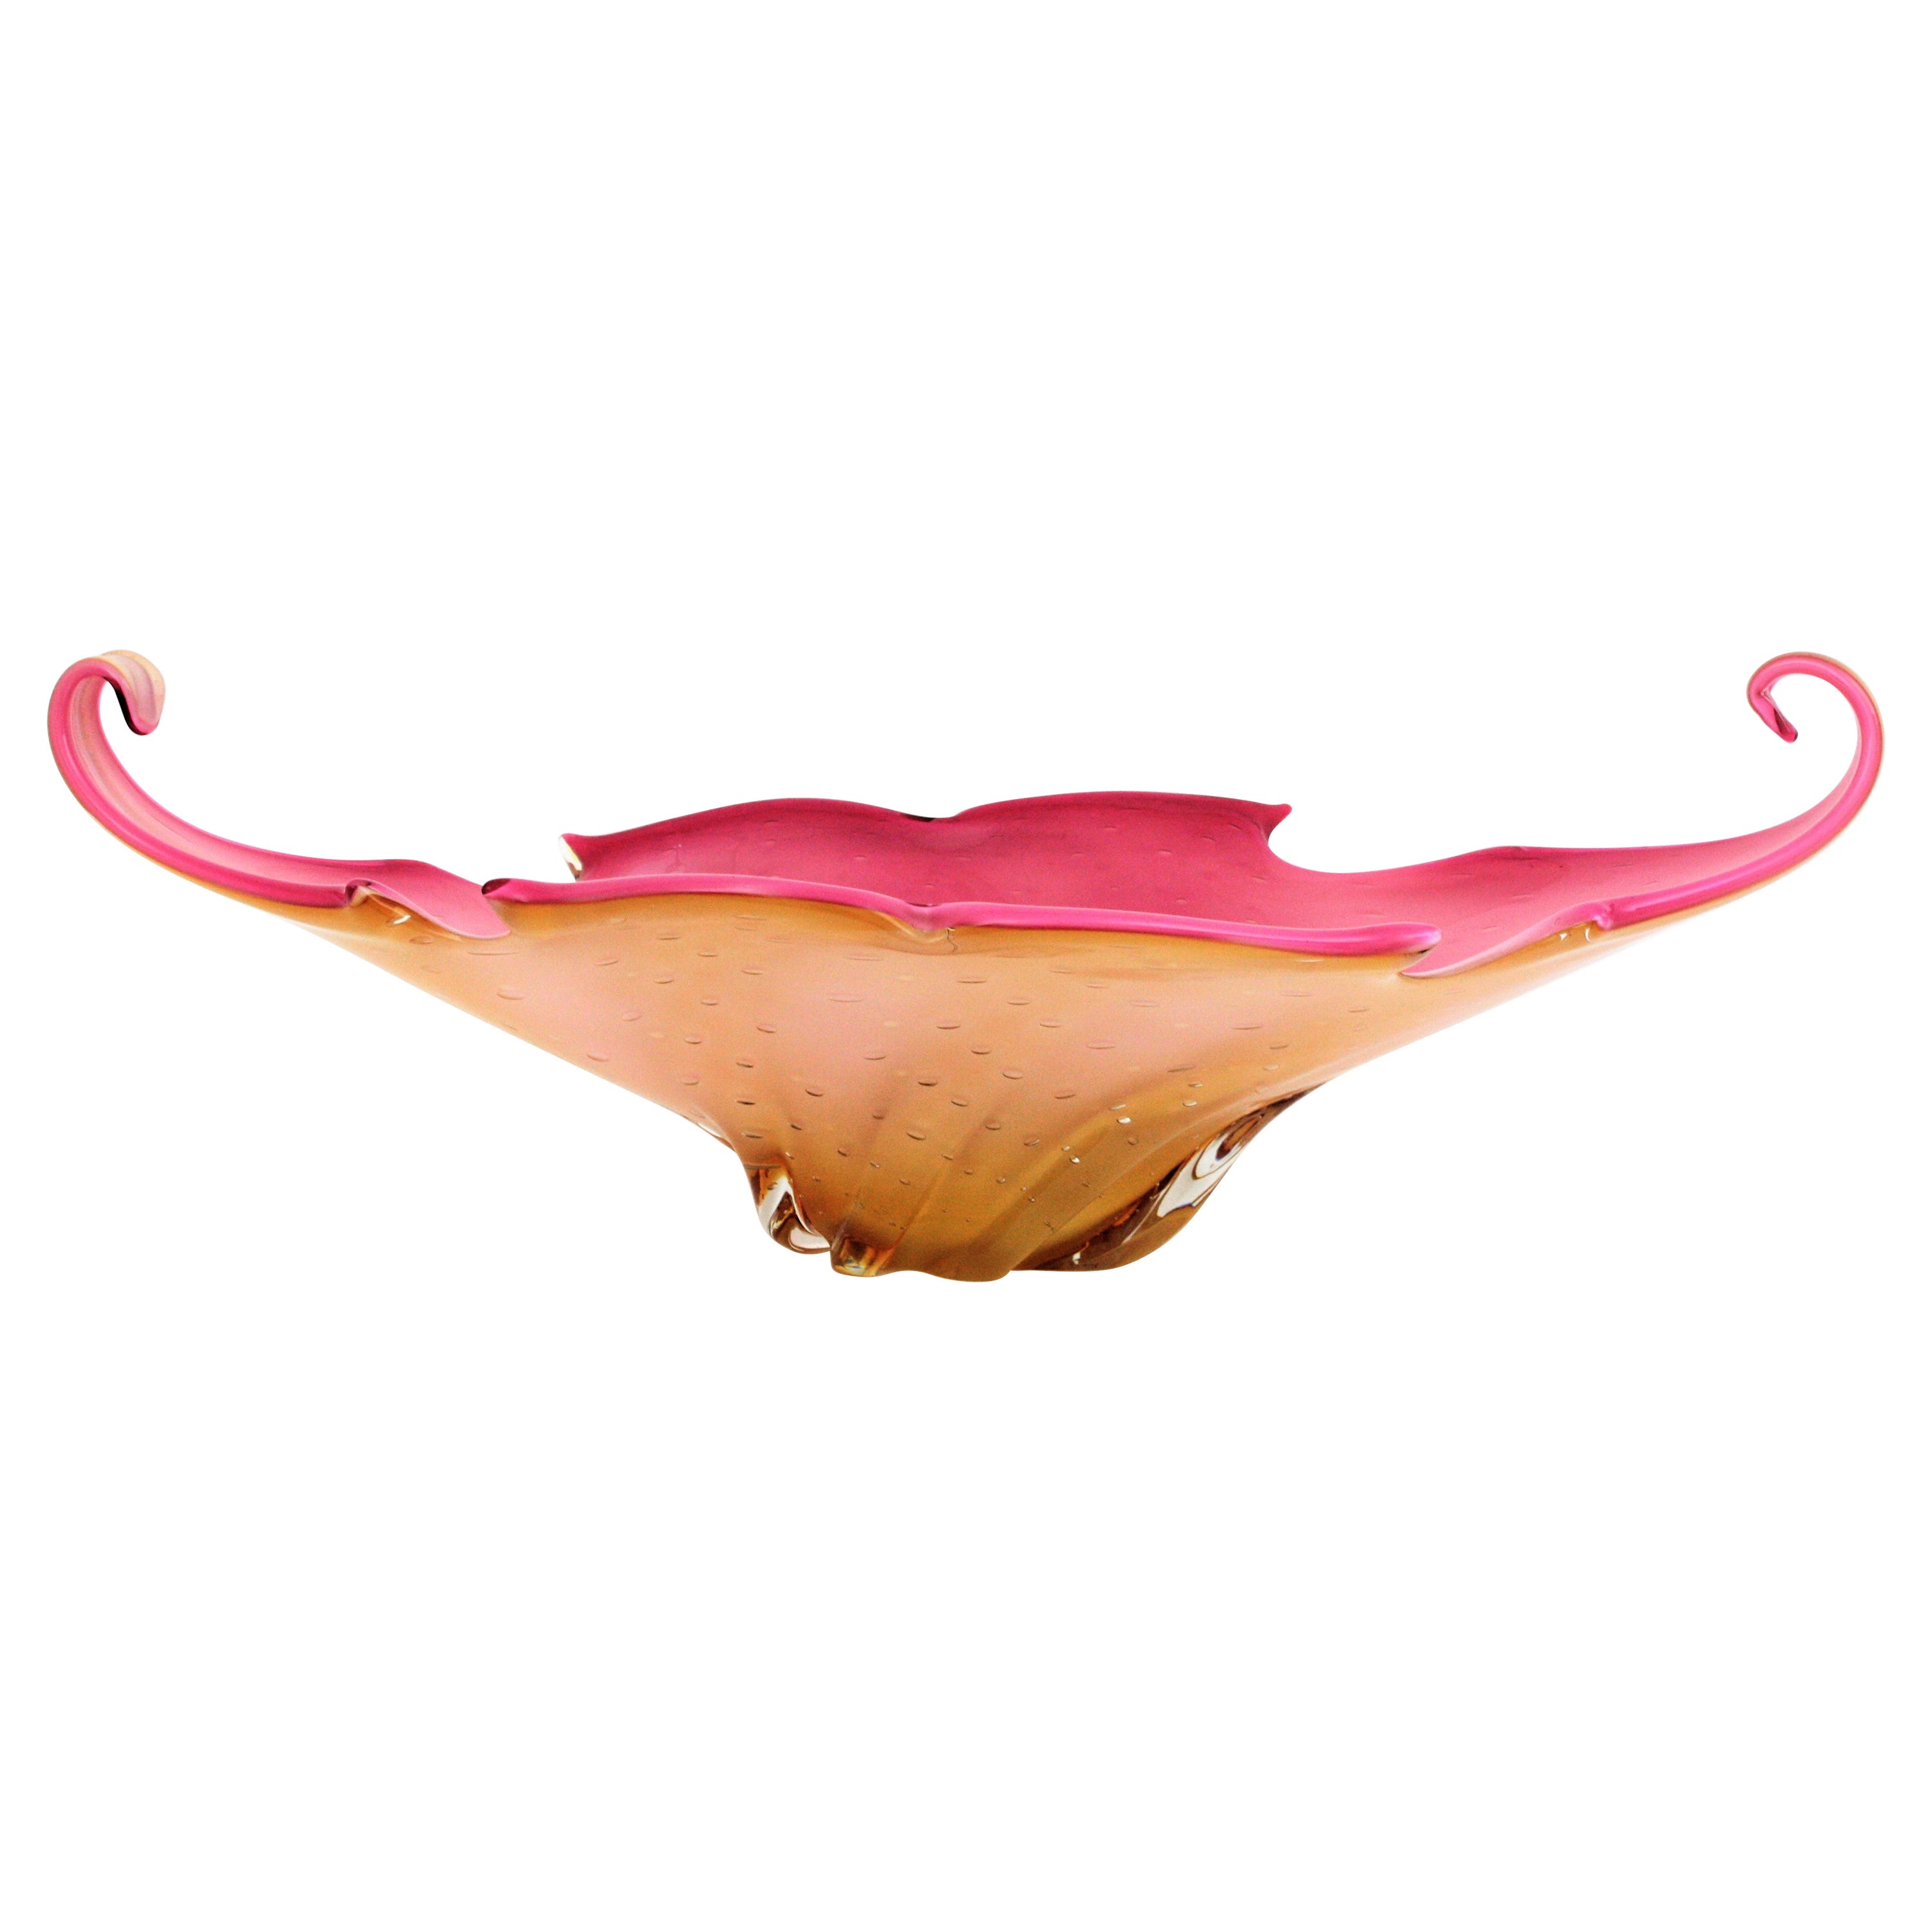 Monumental Italian Modernist Murano glass centerpiece vase.
Extra Large ( 23, 2 in ) pink amber pulled glass centerpiece attributed to Archimede Seguso. Italy, 1950s.
Beautifully shaped elongated bullicante Murano glass centerpiece in clear and